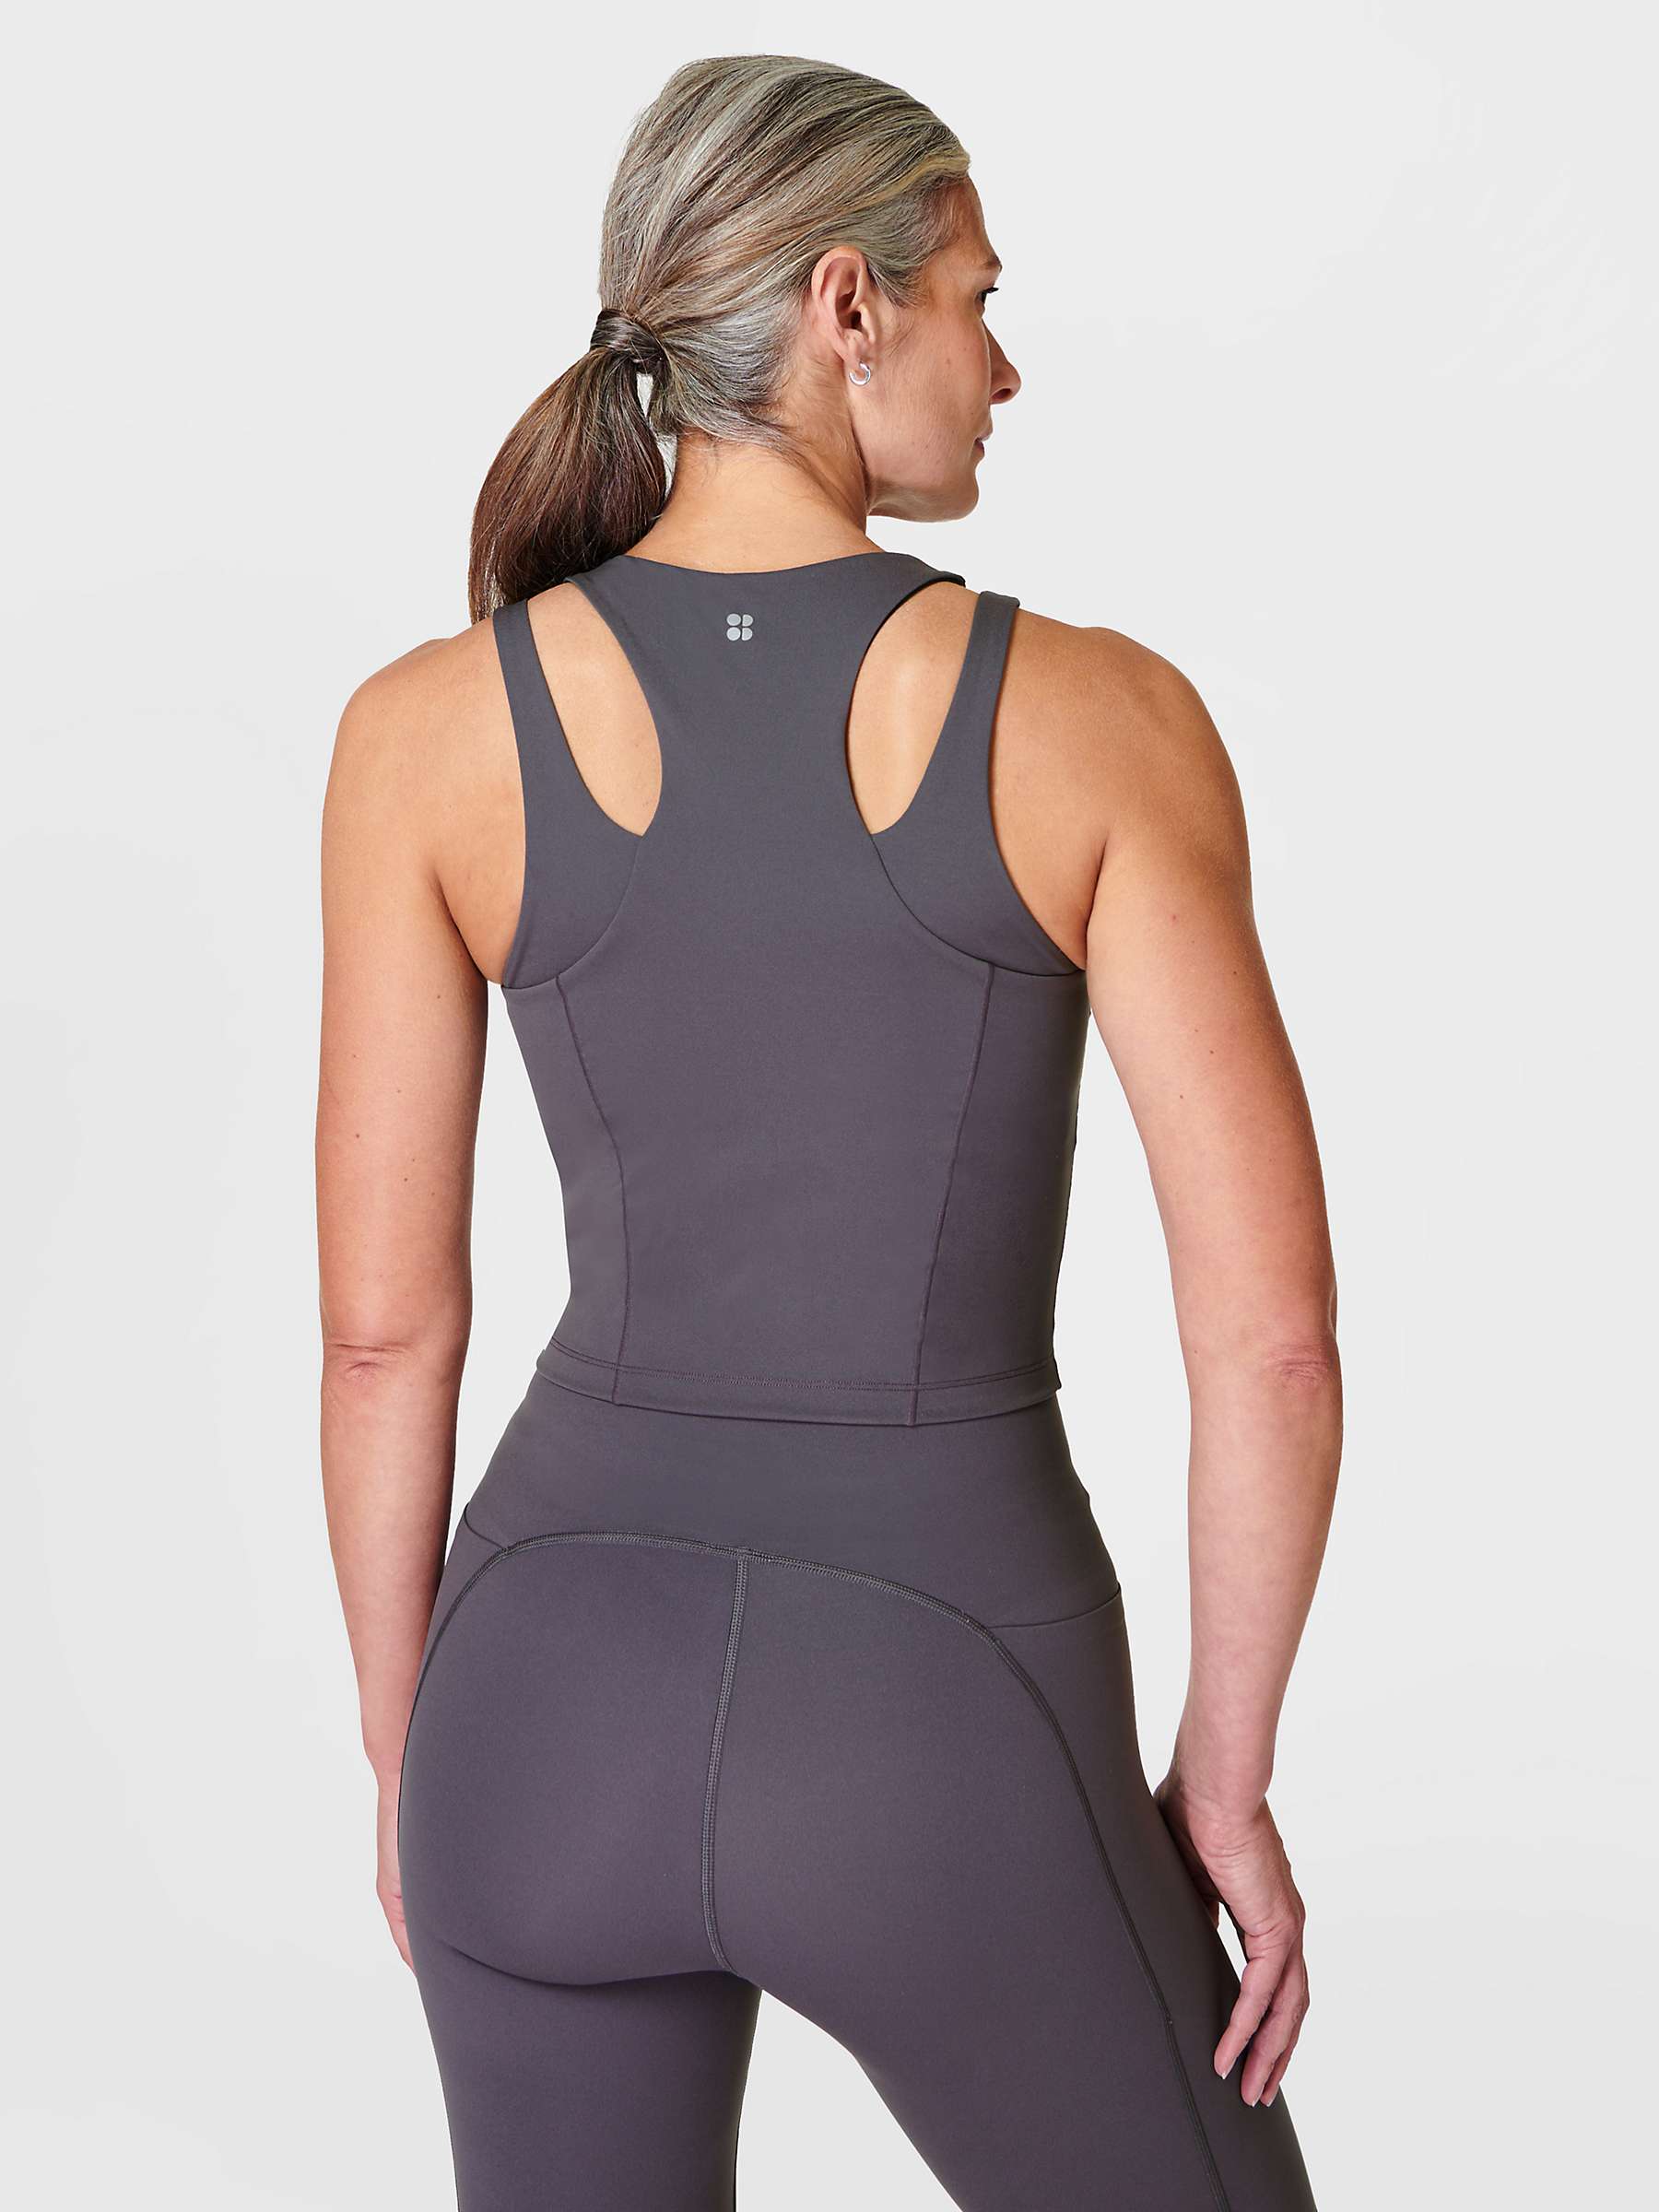 Buy Sweaty Betty Power Contour Workout Tank Top Online at johnlewis.com